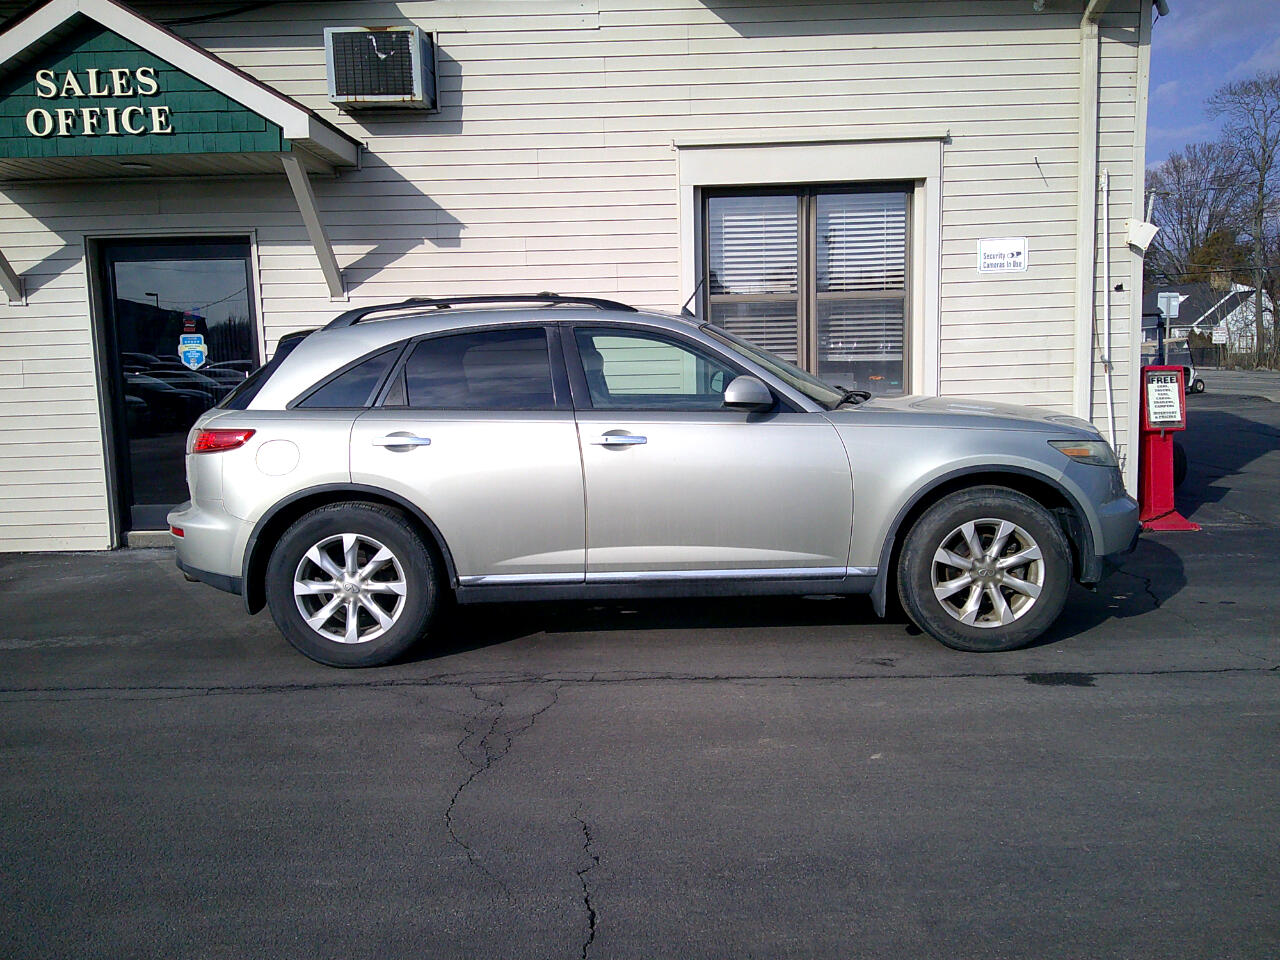 Used 2006 INFINITI FX 35 with VIN JNRAS08W16X204247 for sale in Brockport, NY